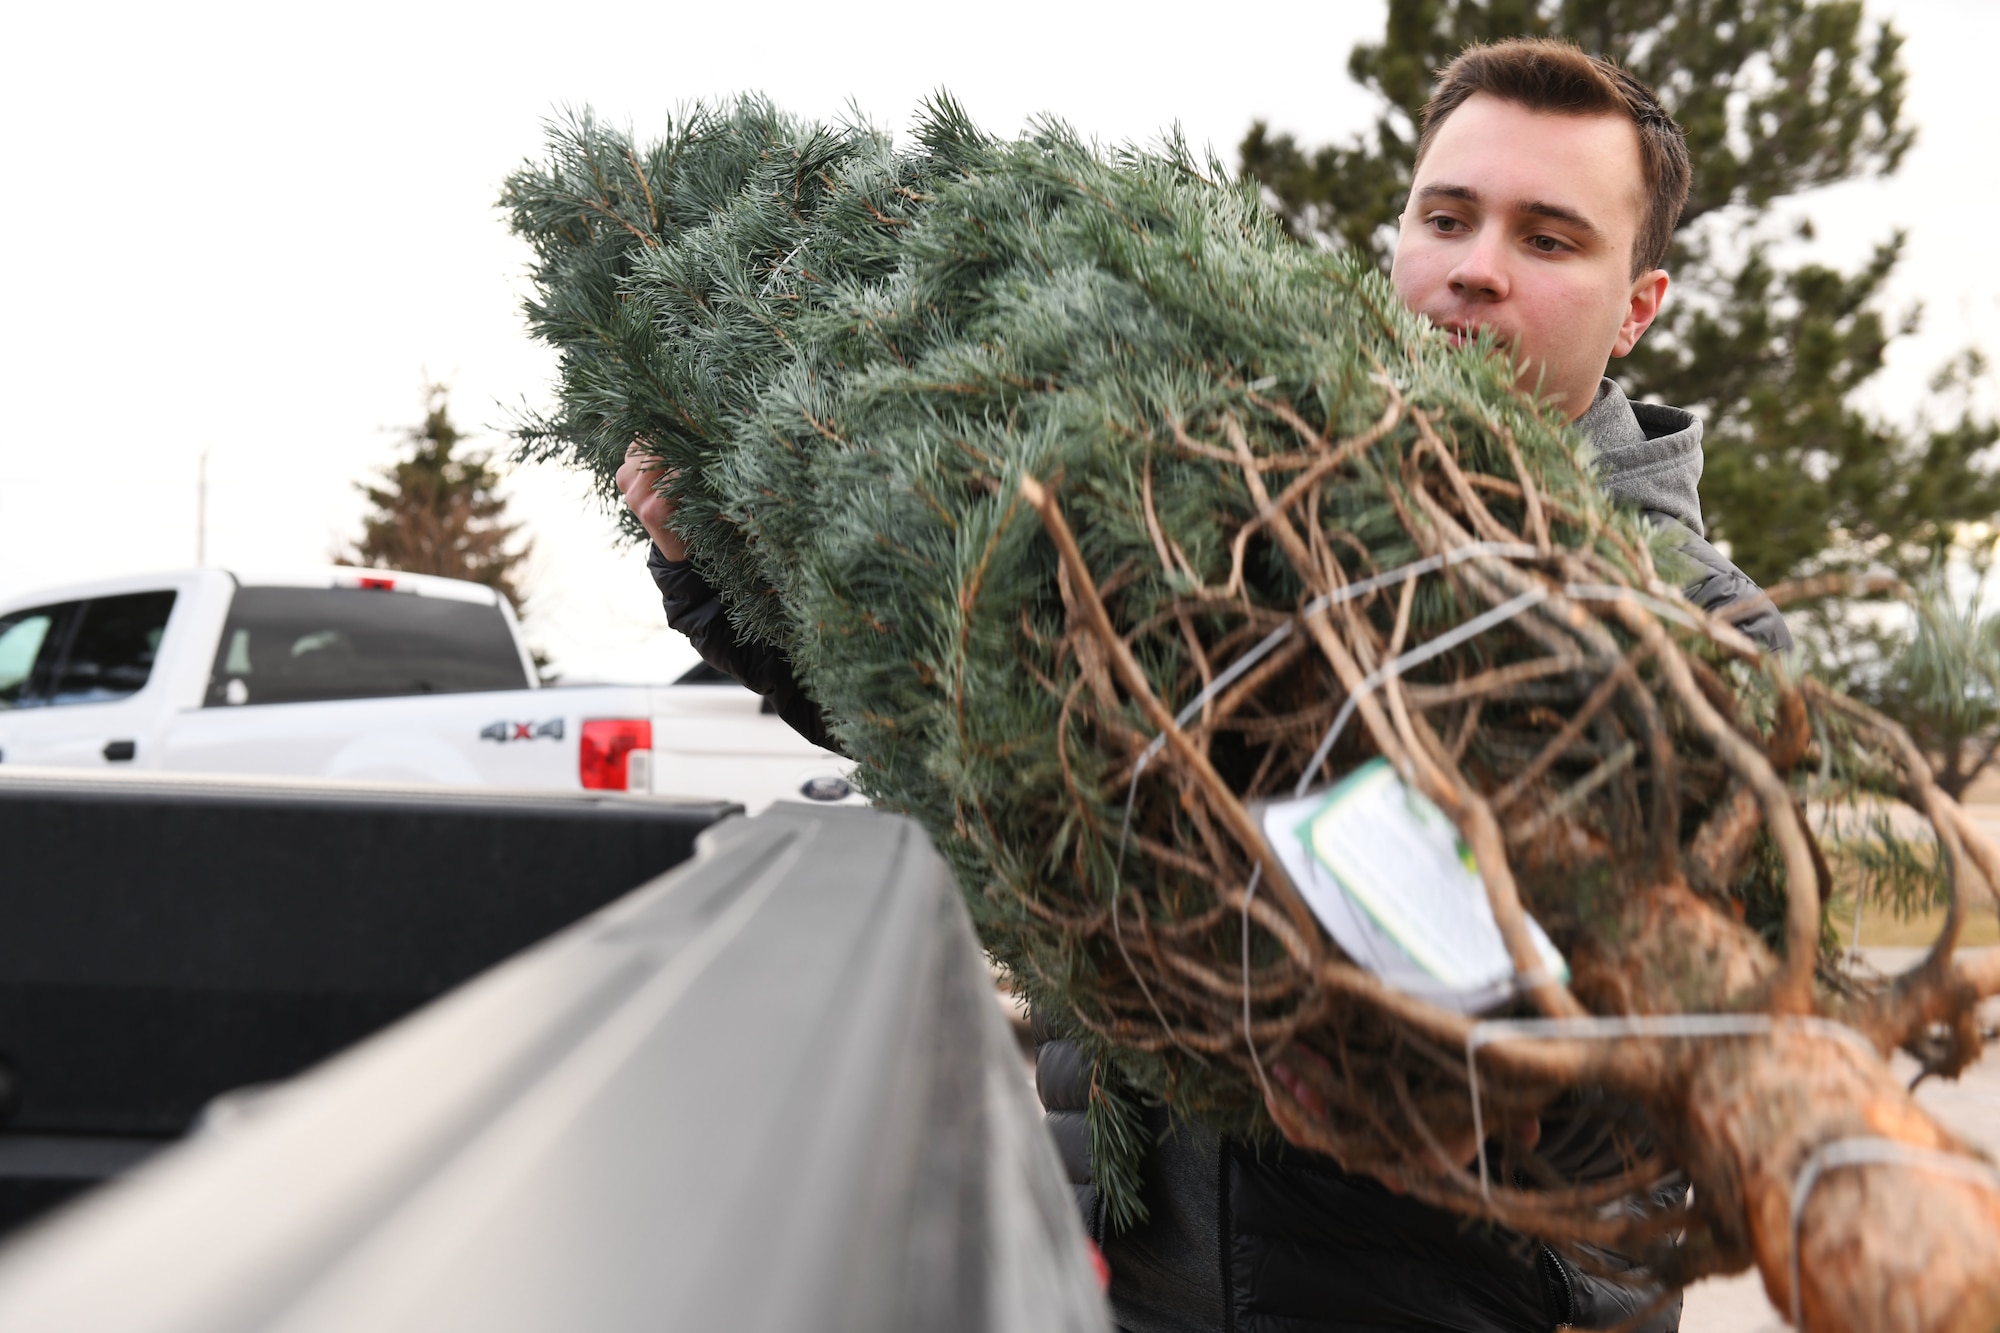 Airman 1st Class Aaron Jude, a 28th Civil Engineer Squadron fire protection apprentice, loads a tree into a truck at Ellsworth Air Force Base, S.D., Nov. 30, 2018. Trees for Troops is an event where community members all over the country donate trees to service members so they can have a free tree for the holidays. (U.S. Air Force photo by Airman 1st Class Thomas Karol)